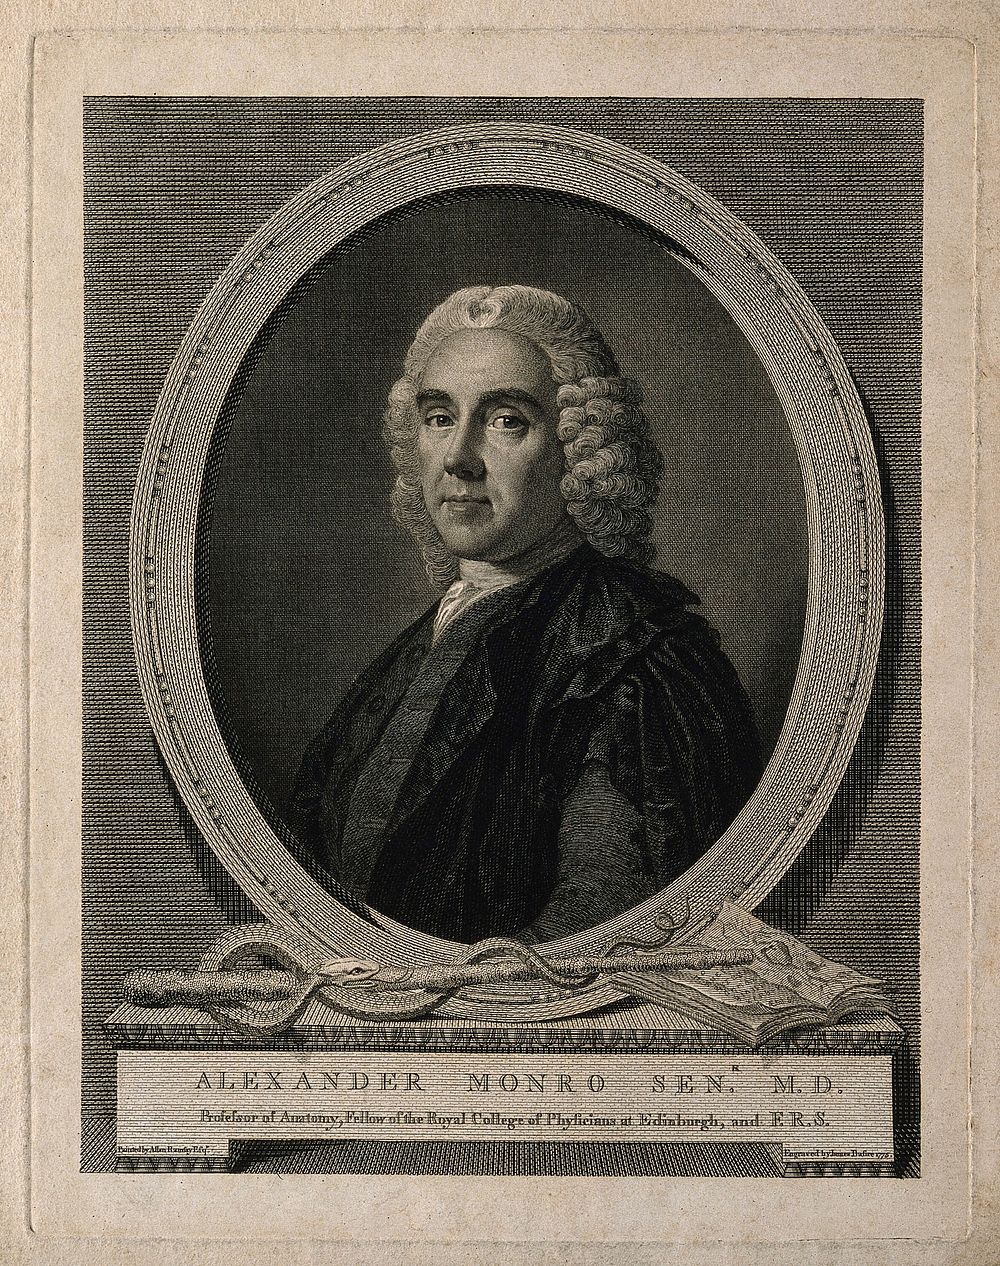 Alexander Monro. Line engraving by J. Basire, 1775, after A. Ramsay, 1749.